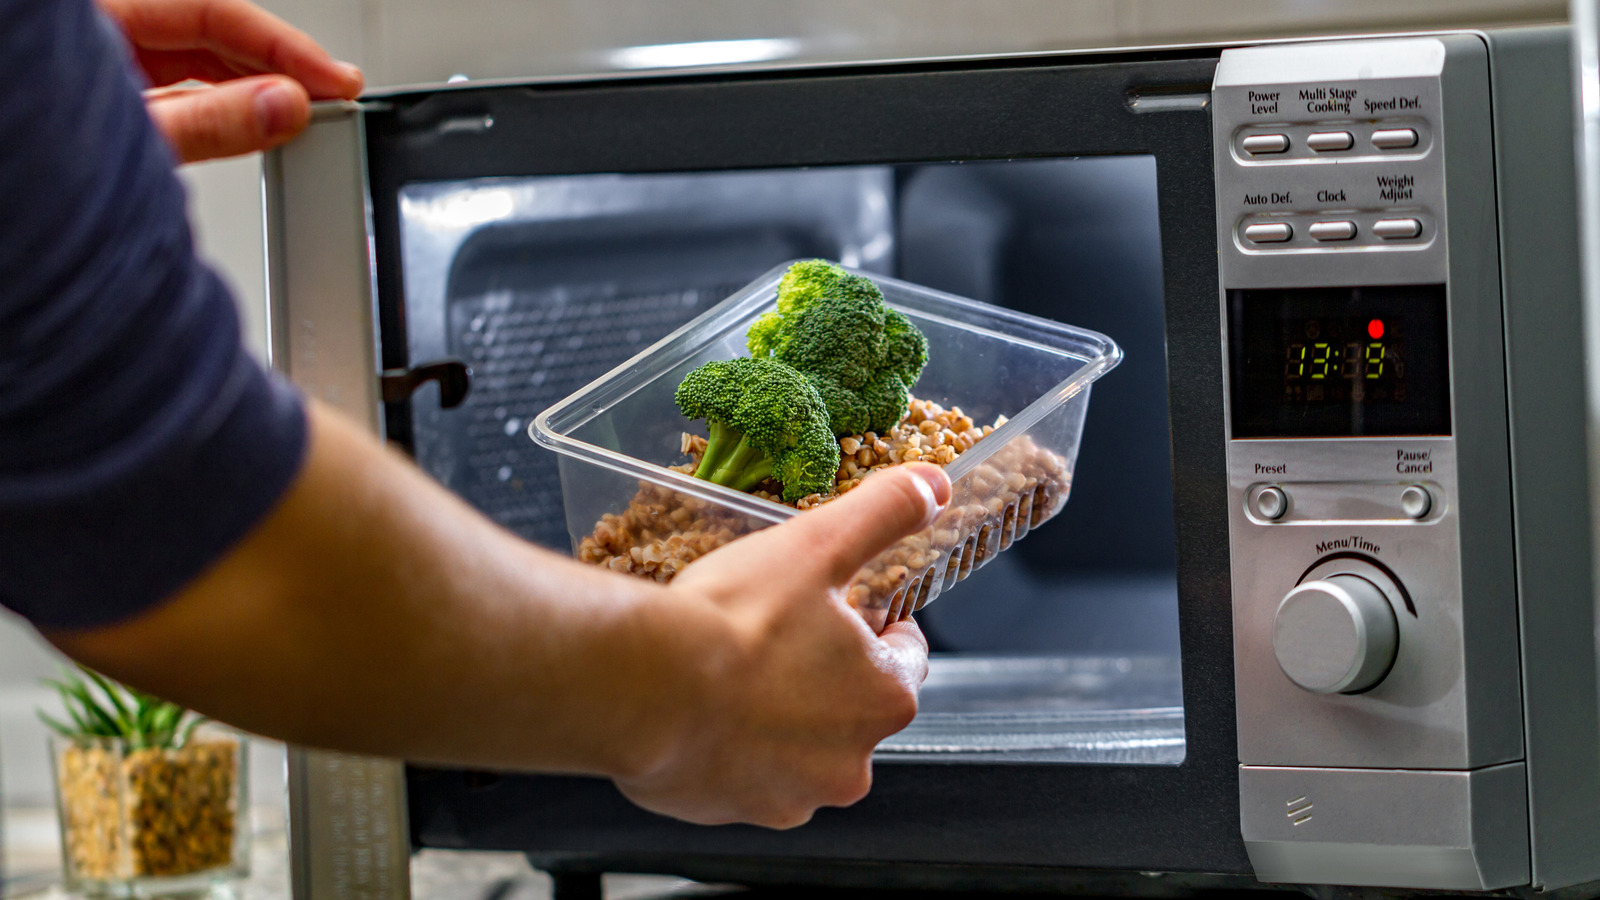 https://www.housedigest.com/img/gallery/why-you-should-stop-using-plastictupperware-in-the-microwave-immediately/l-intro-1652186901.jpg